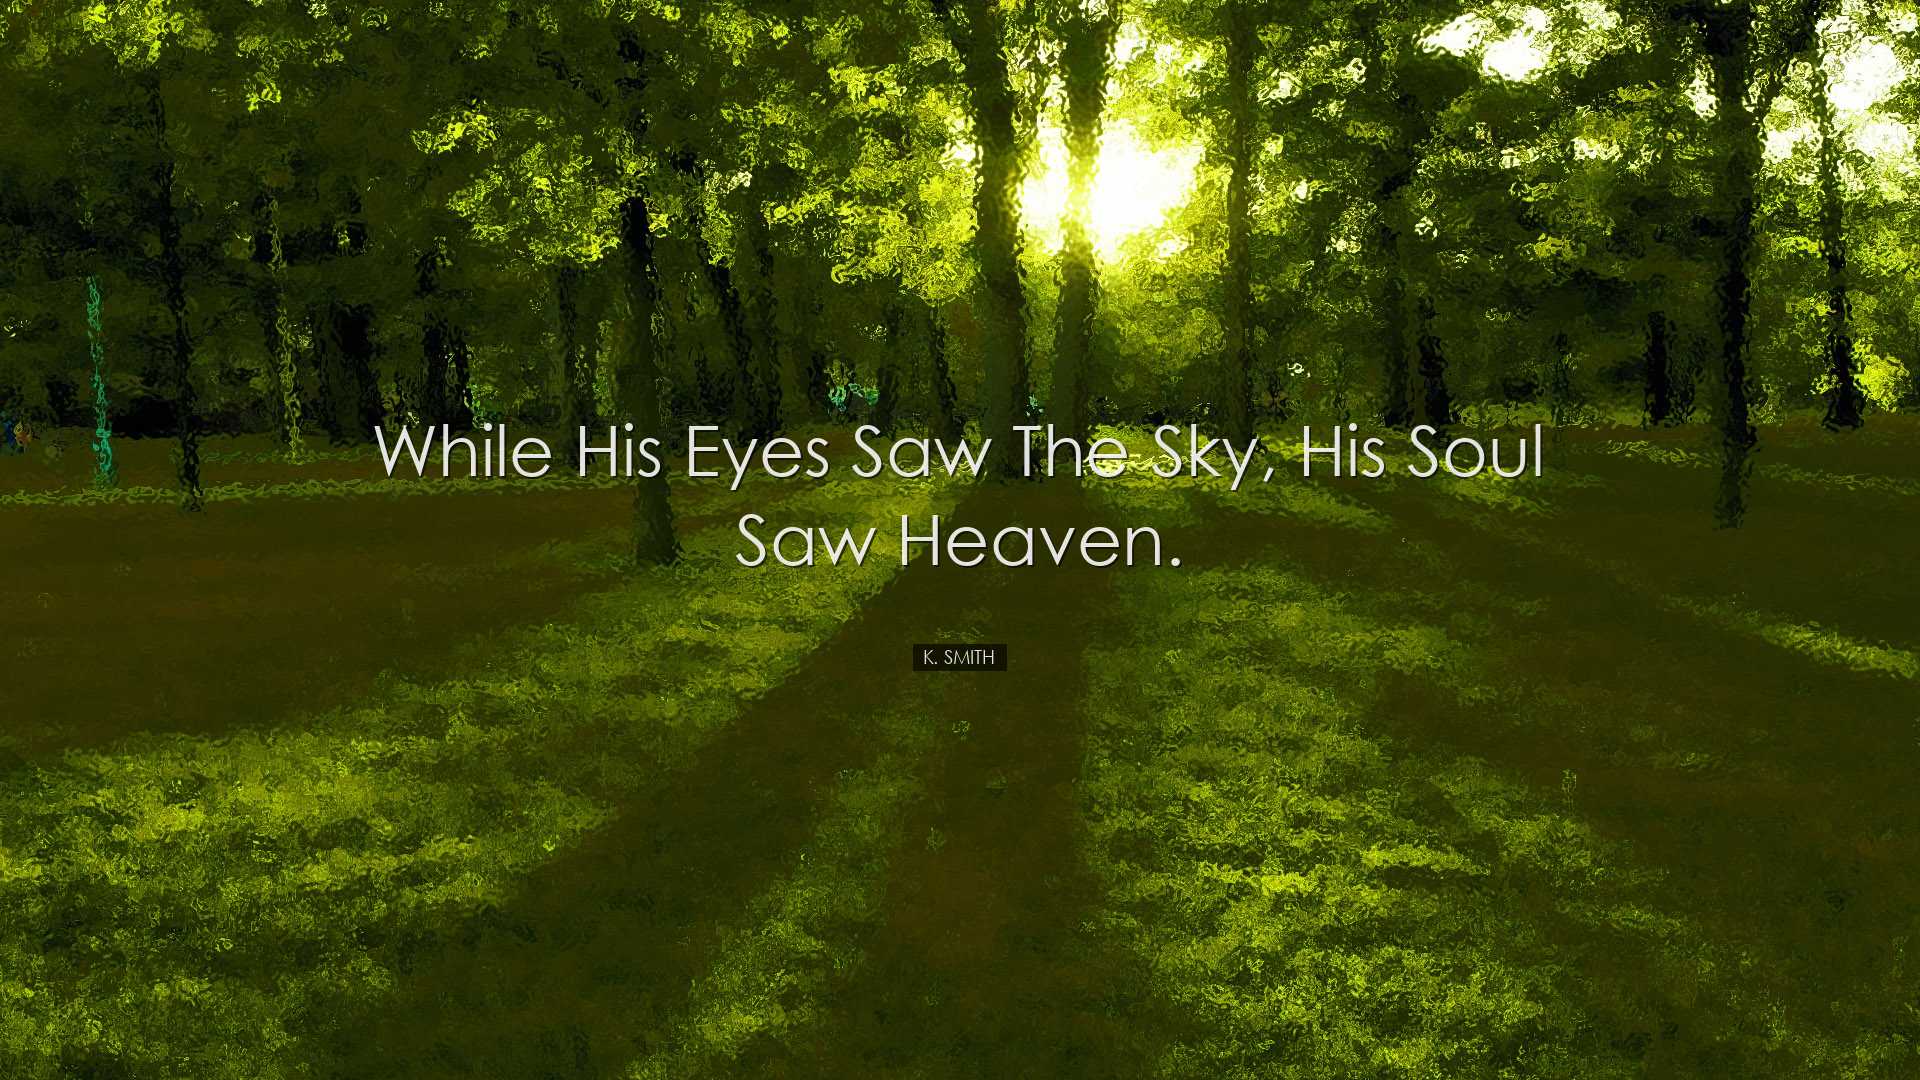 While his eyes saw the sky, his soul saw Heaven. - K. Smith